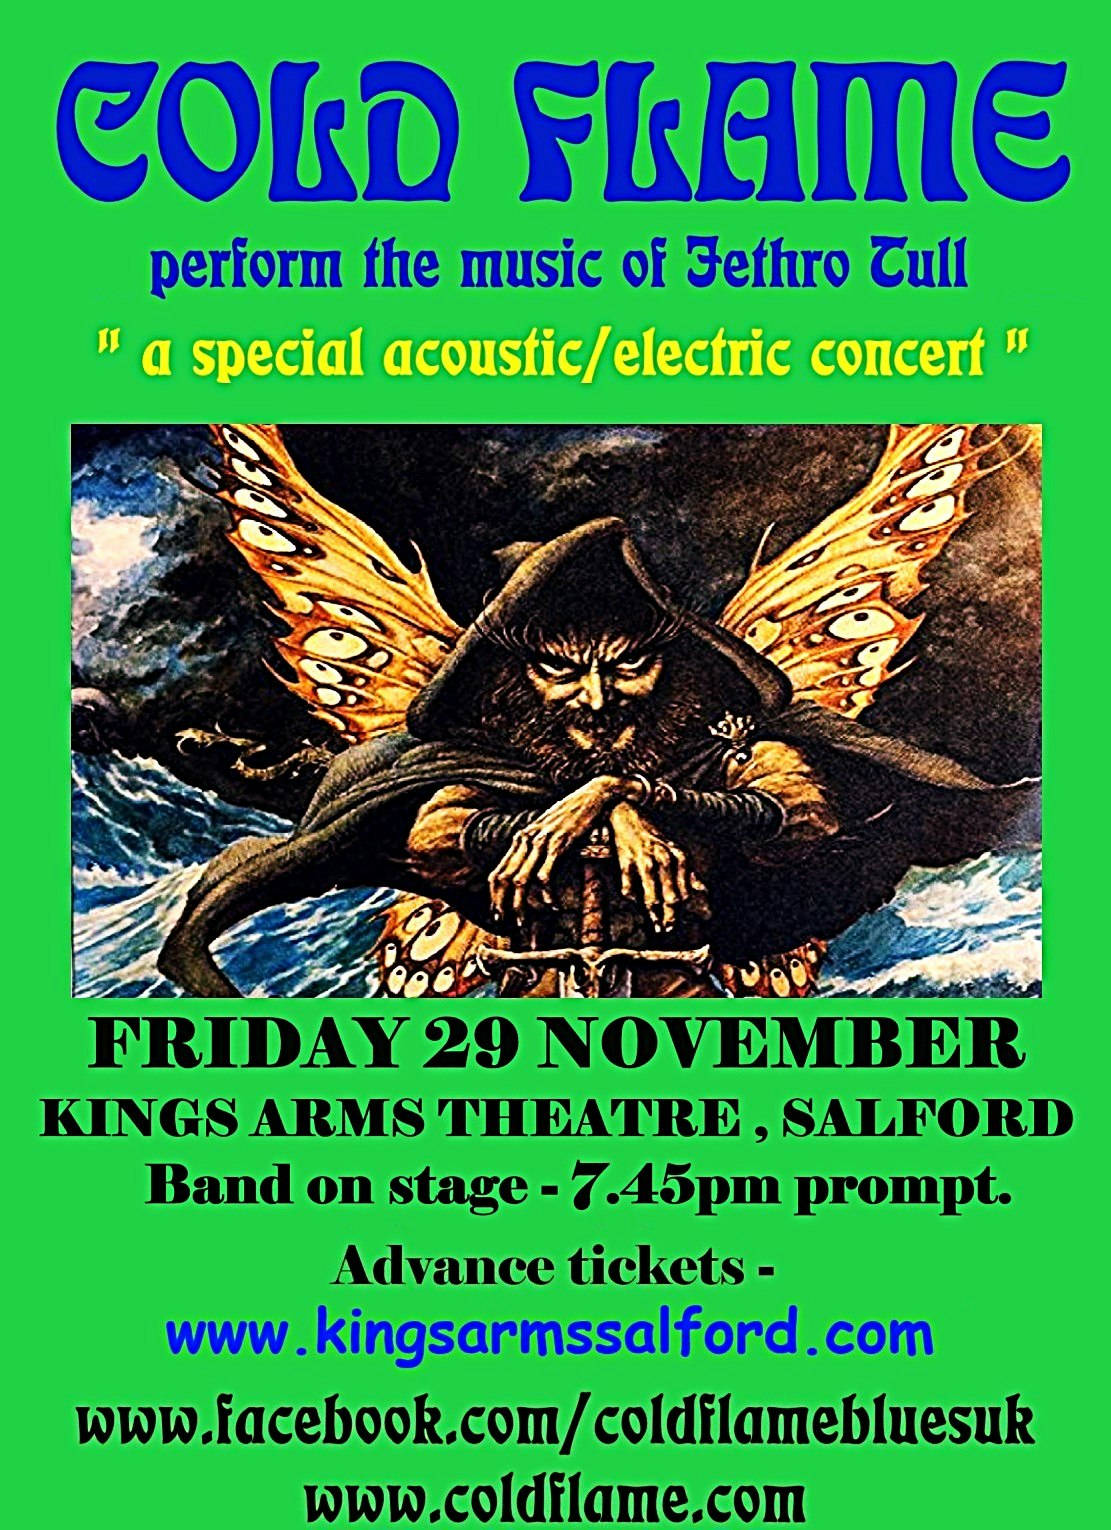 COLD FLAME perform the music of JETHRO TULL